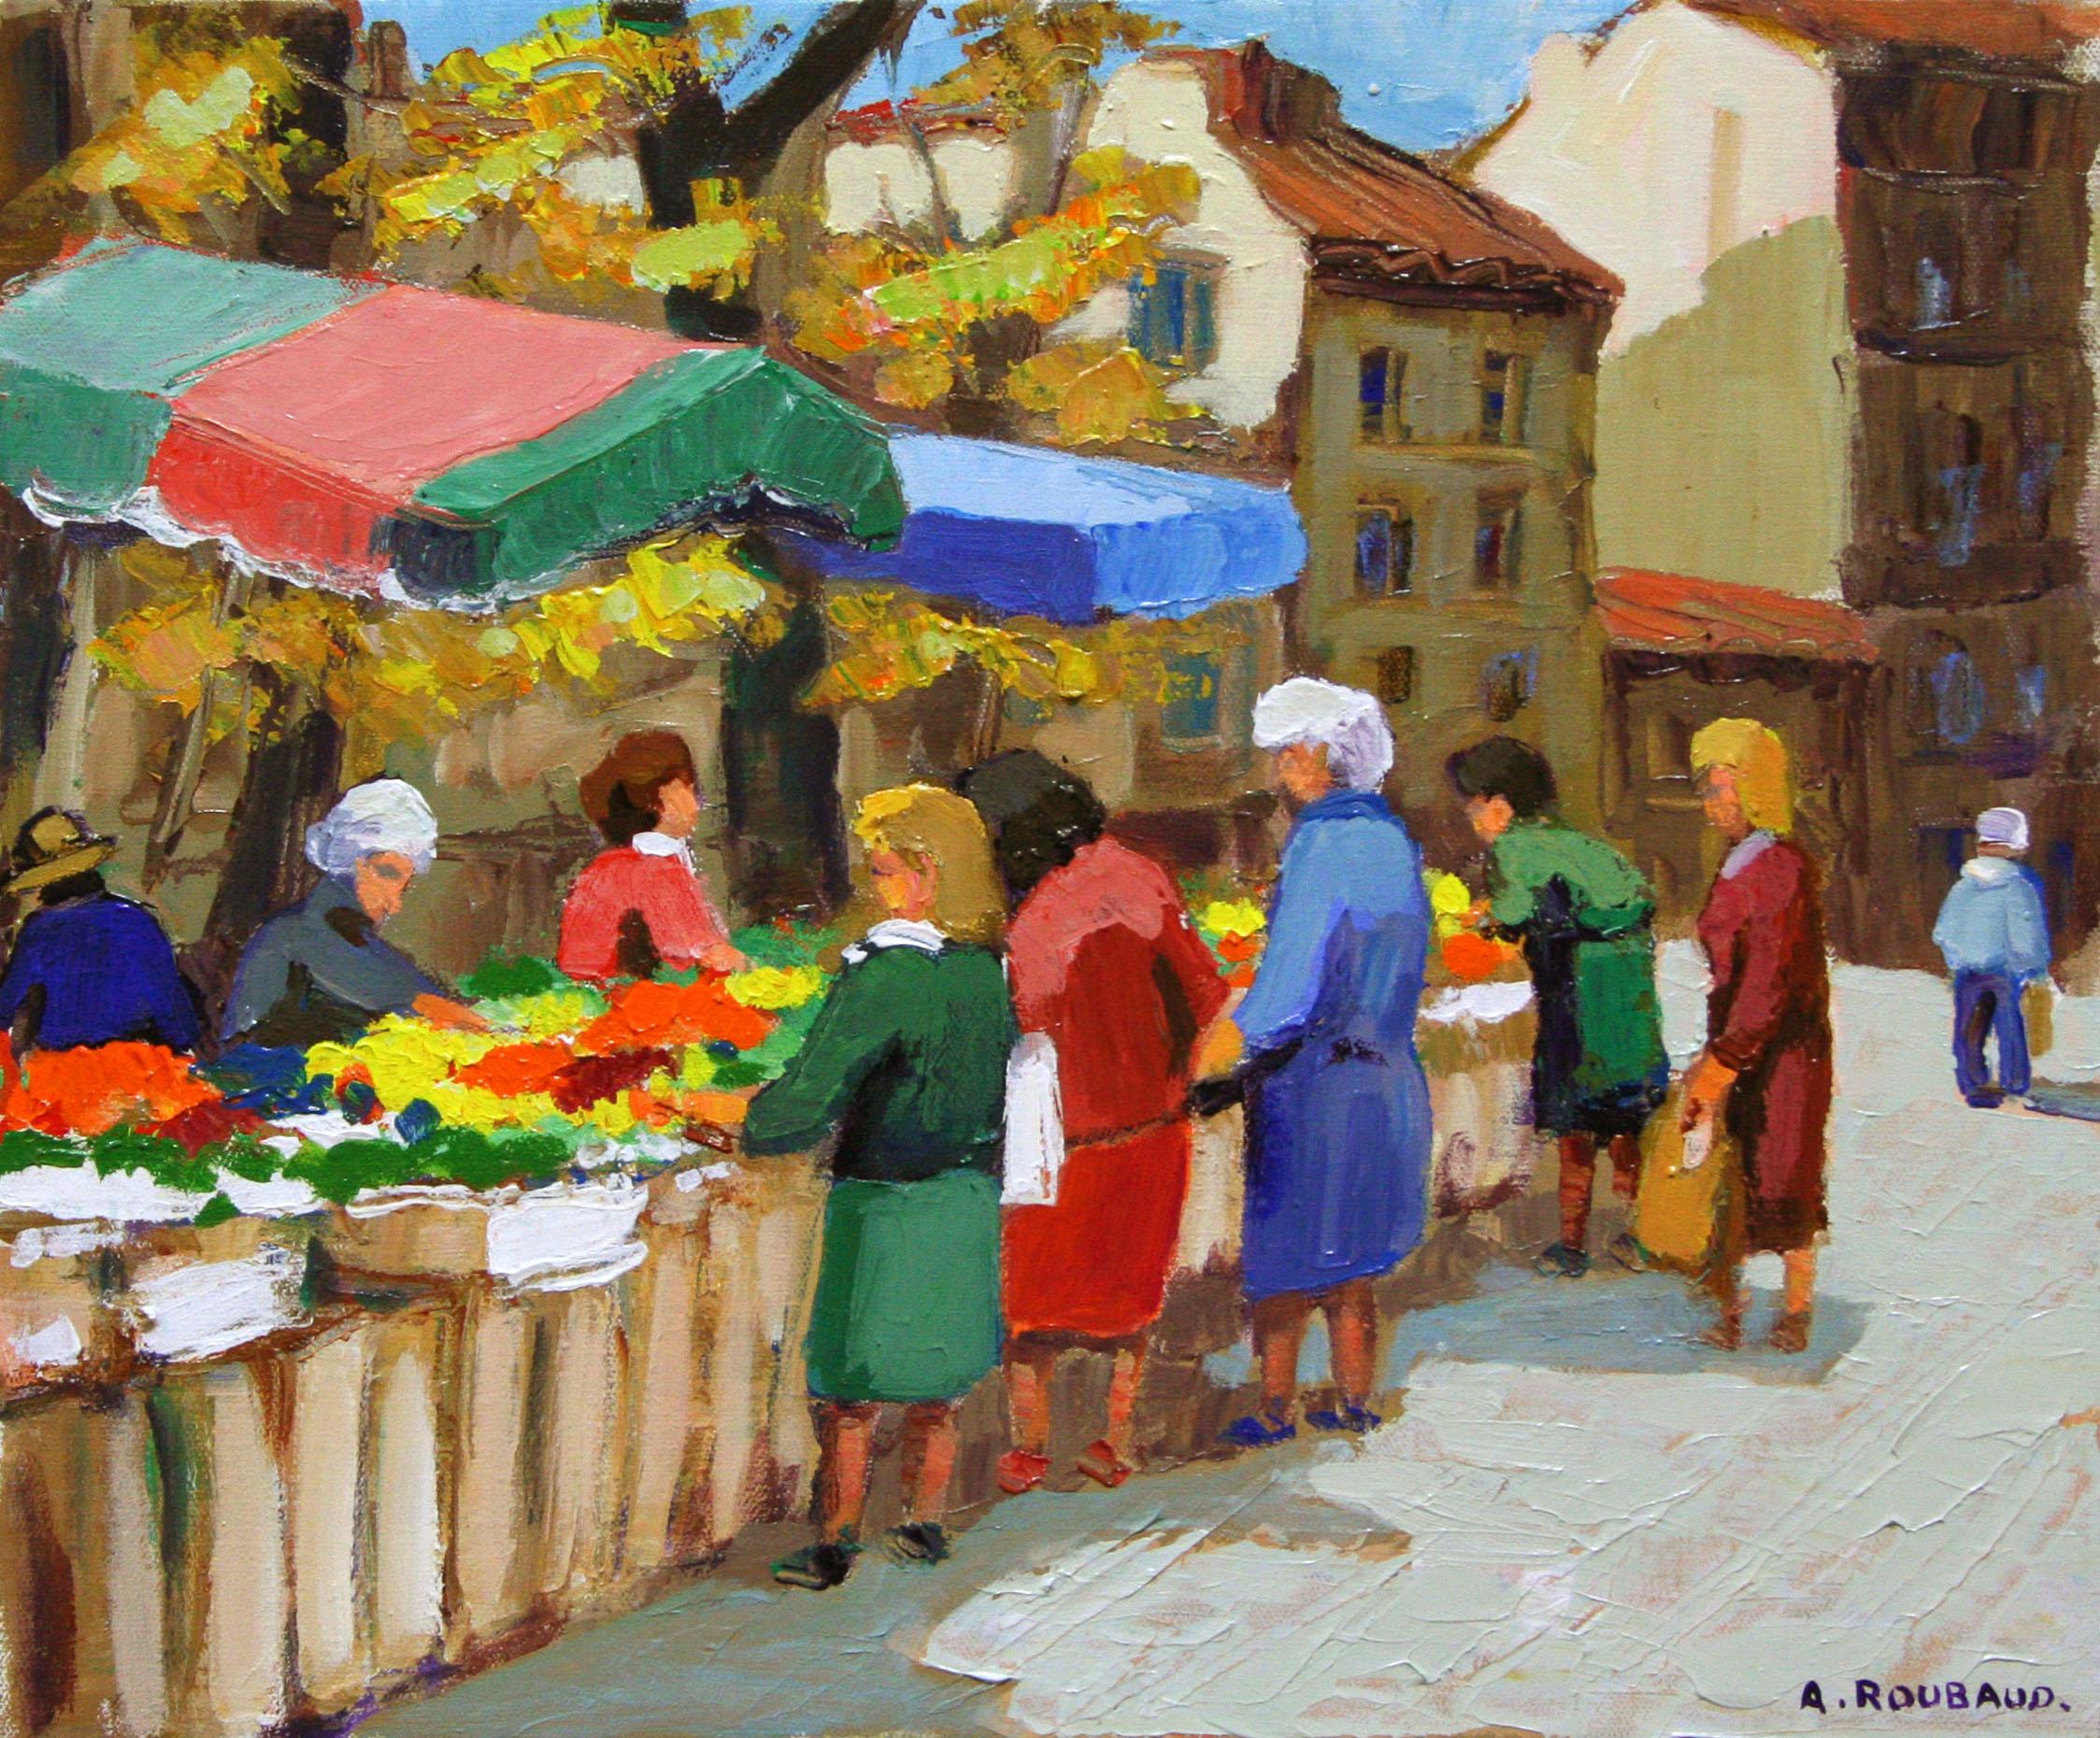 André Roubaud Figurative Painting - "Marche Cours Joseph Thierry" 15 x 18 inch Oil on Canvas by Andre Roubaud